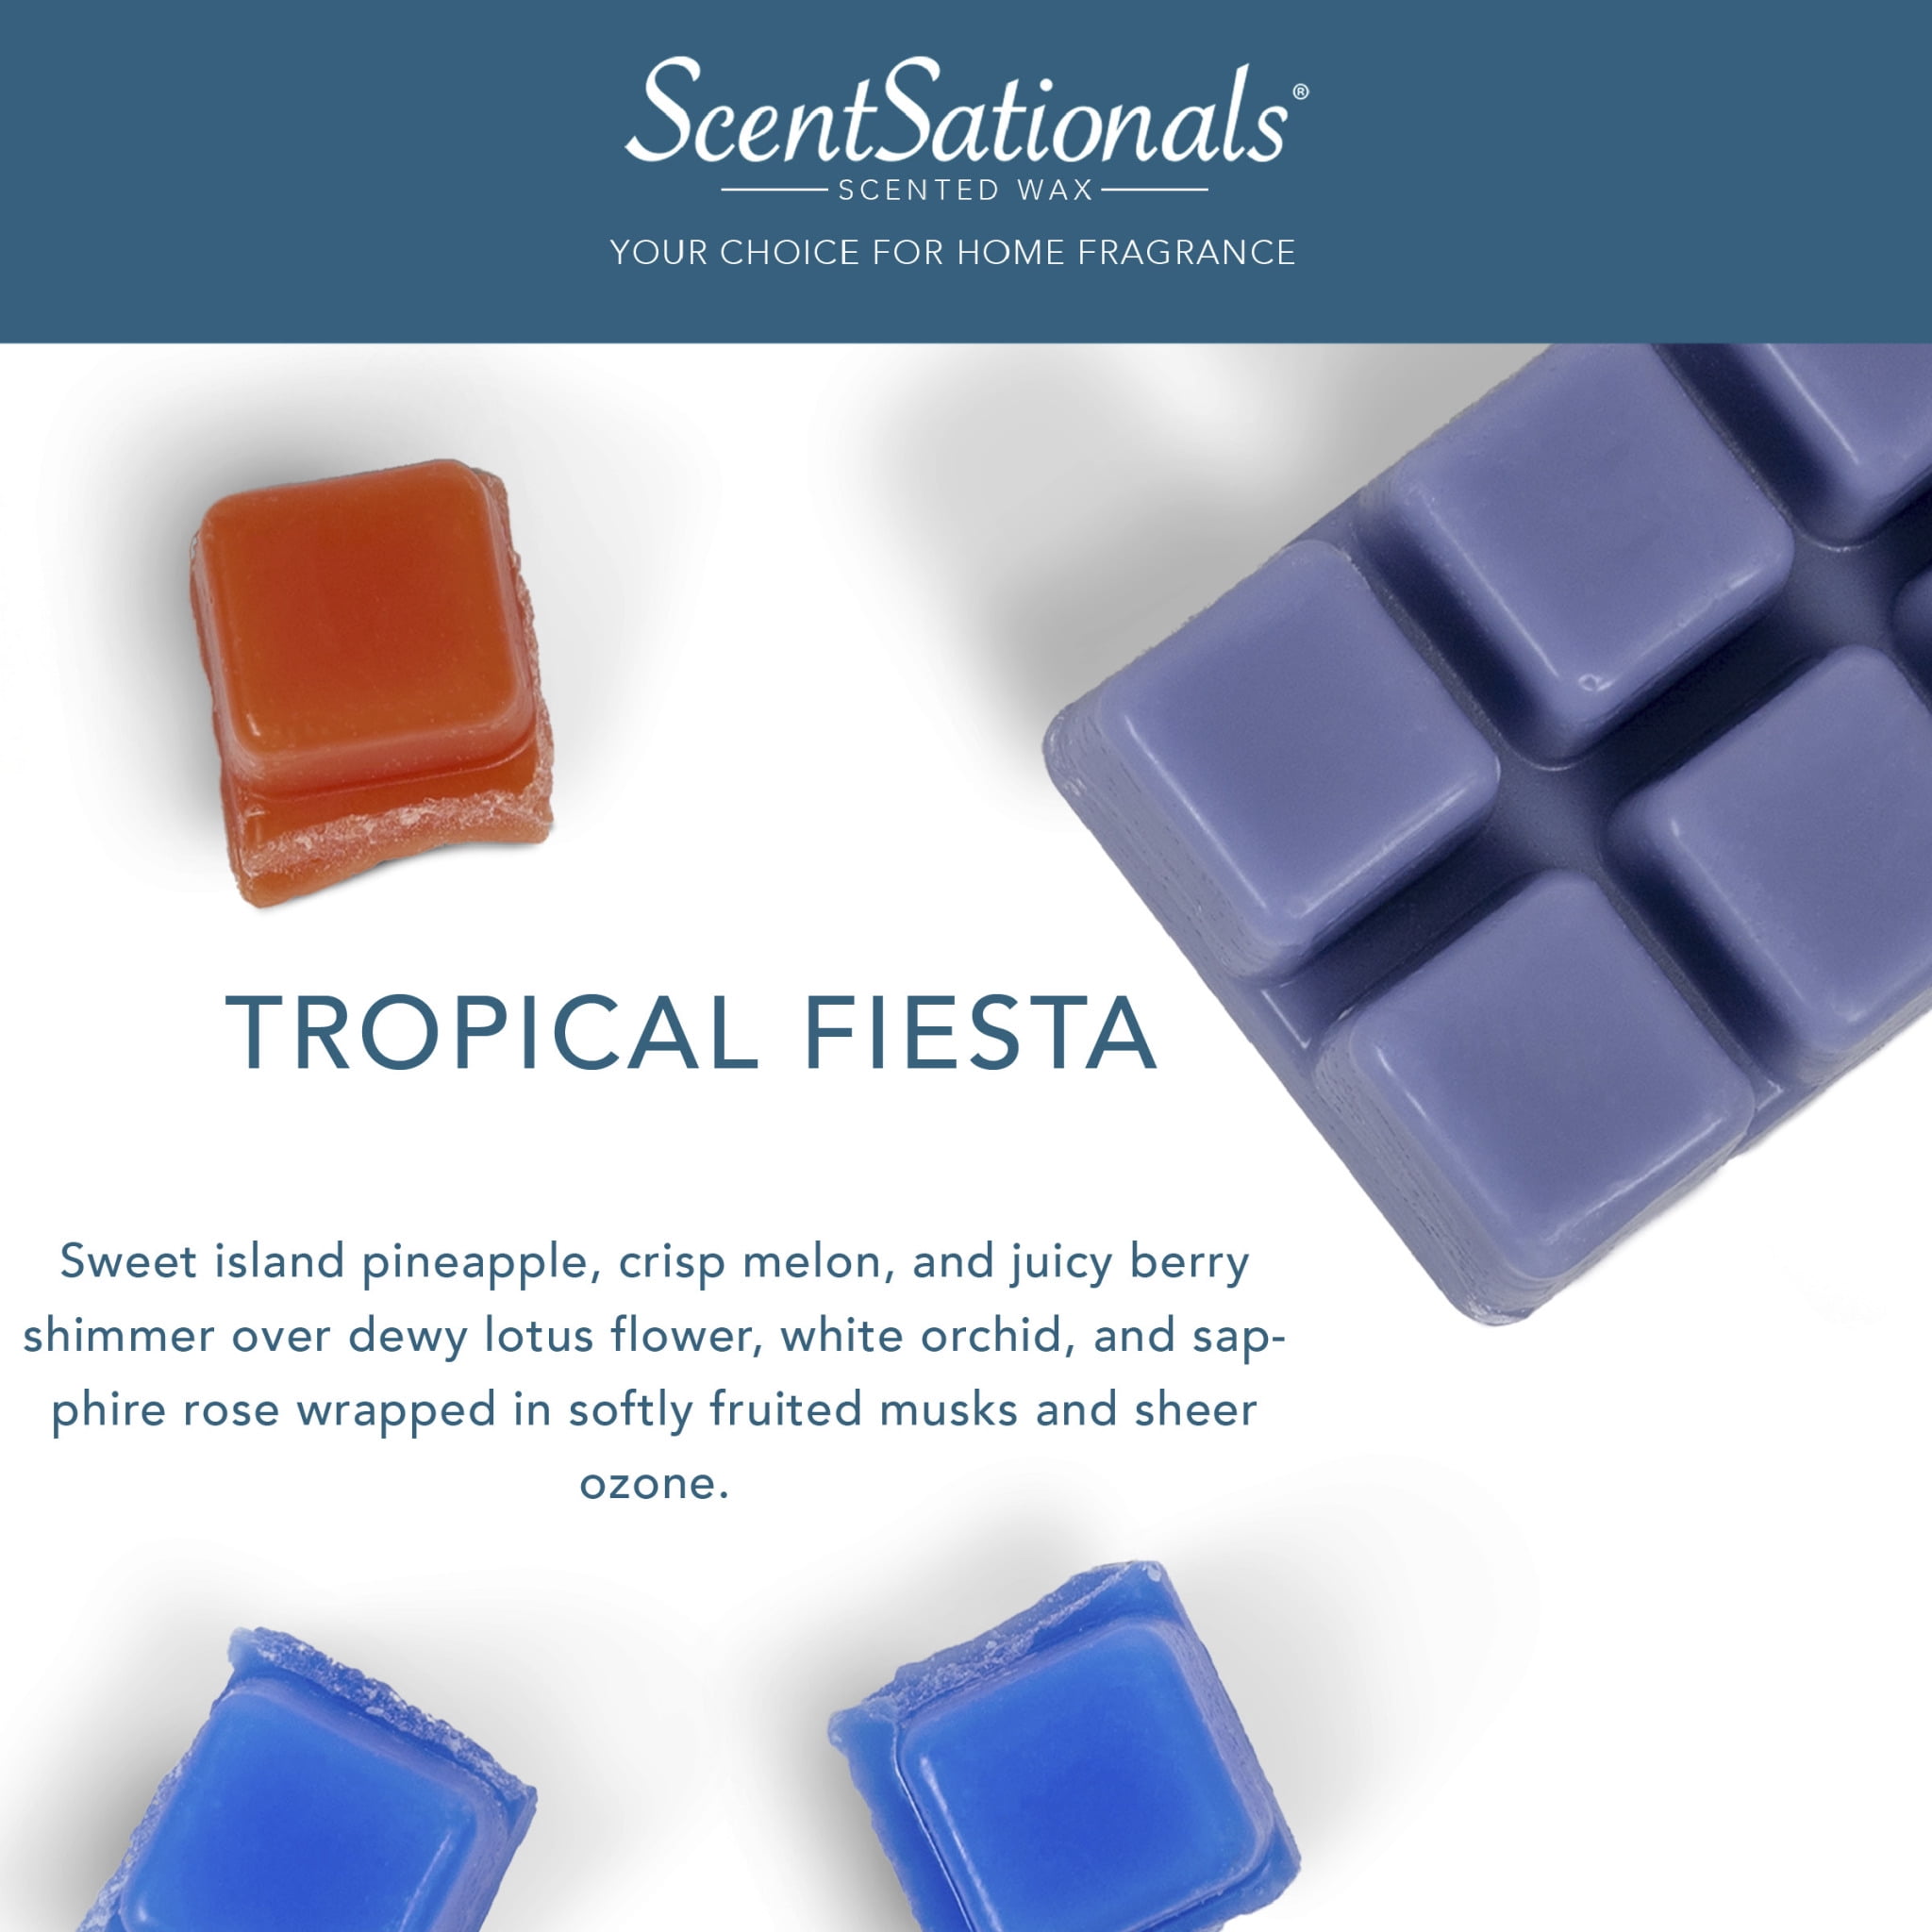 Tropical Christmas highly scented wax melts